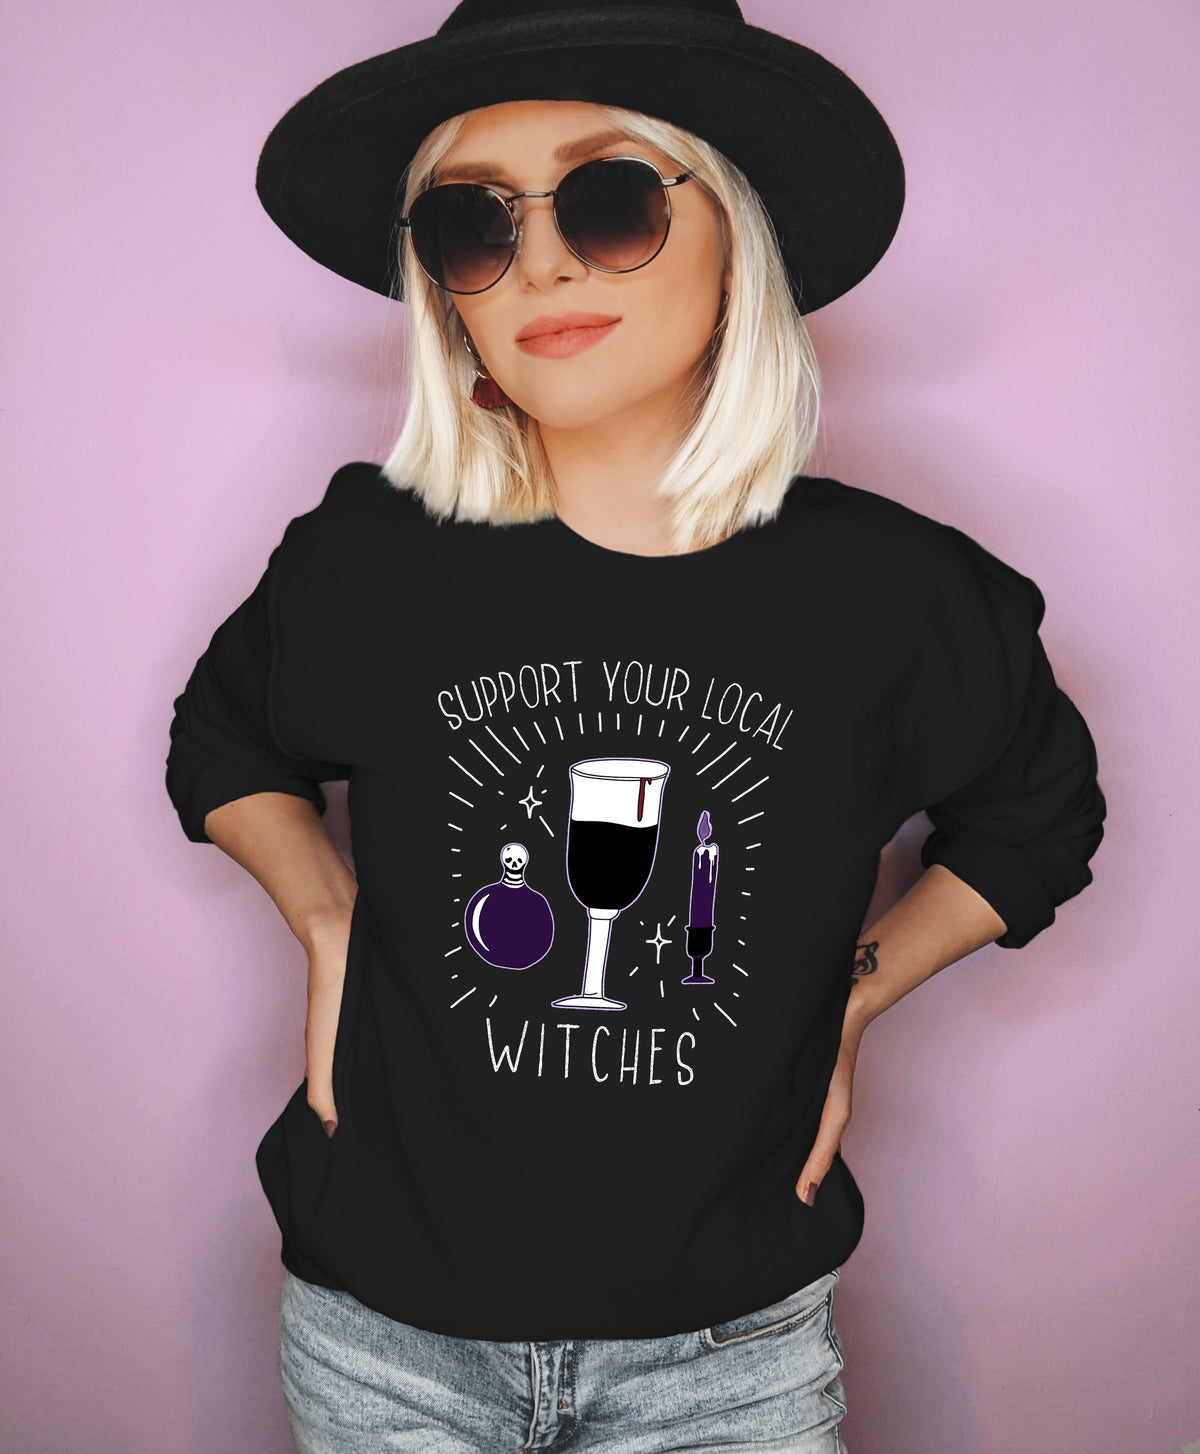 Black sweatshirt saying support your local witches - HighCiti